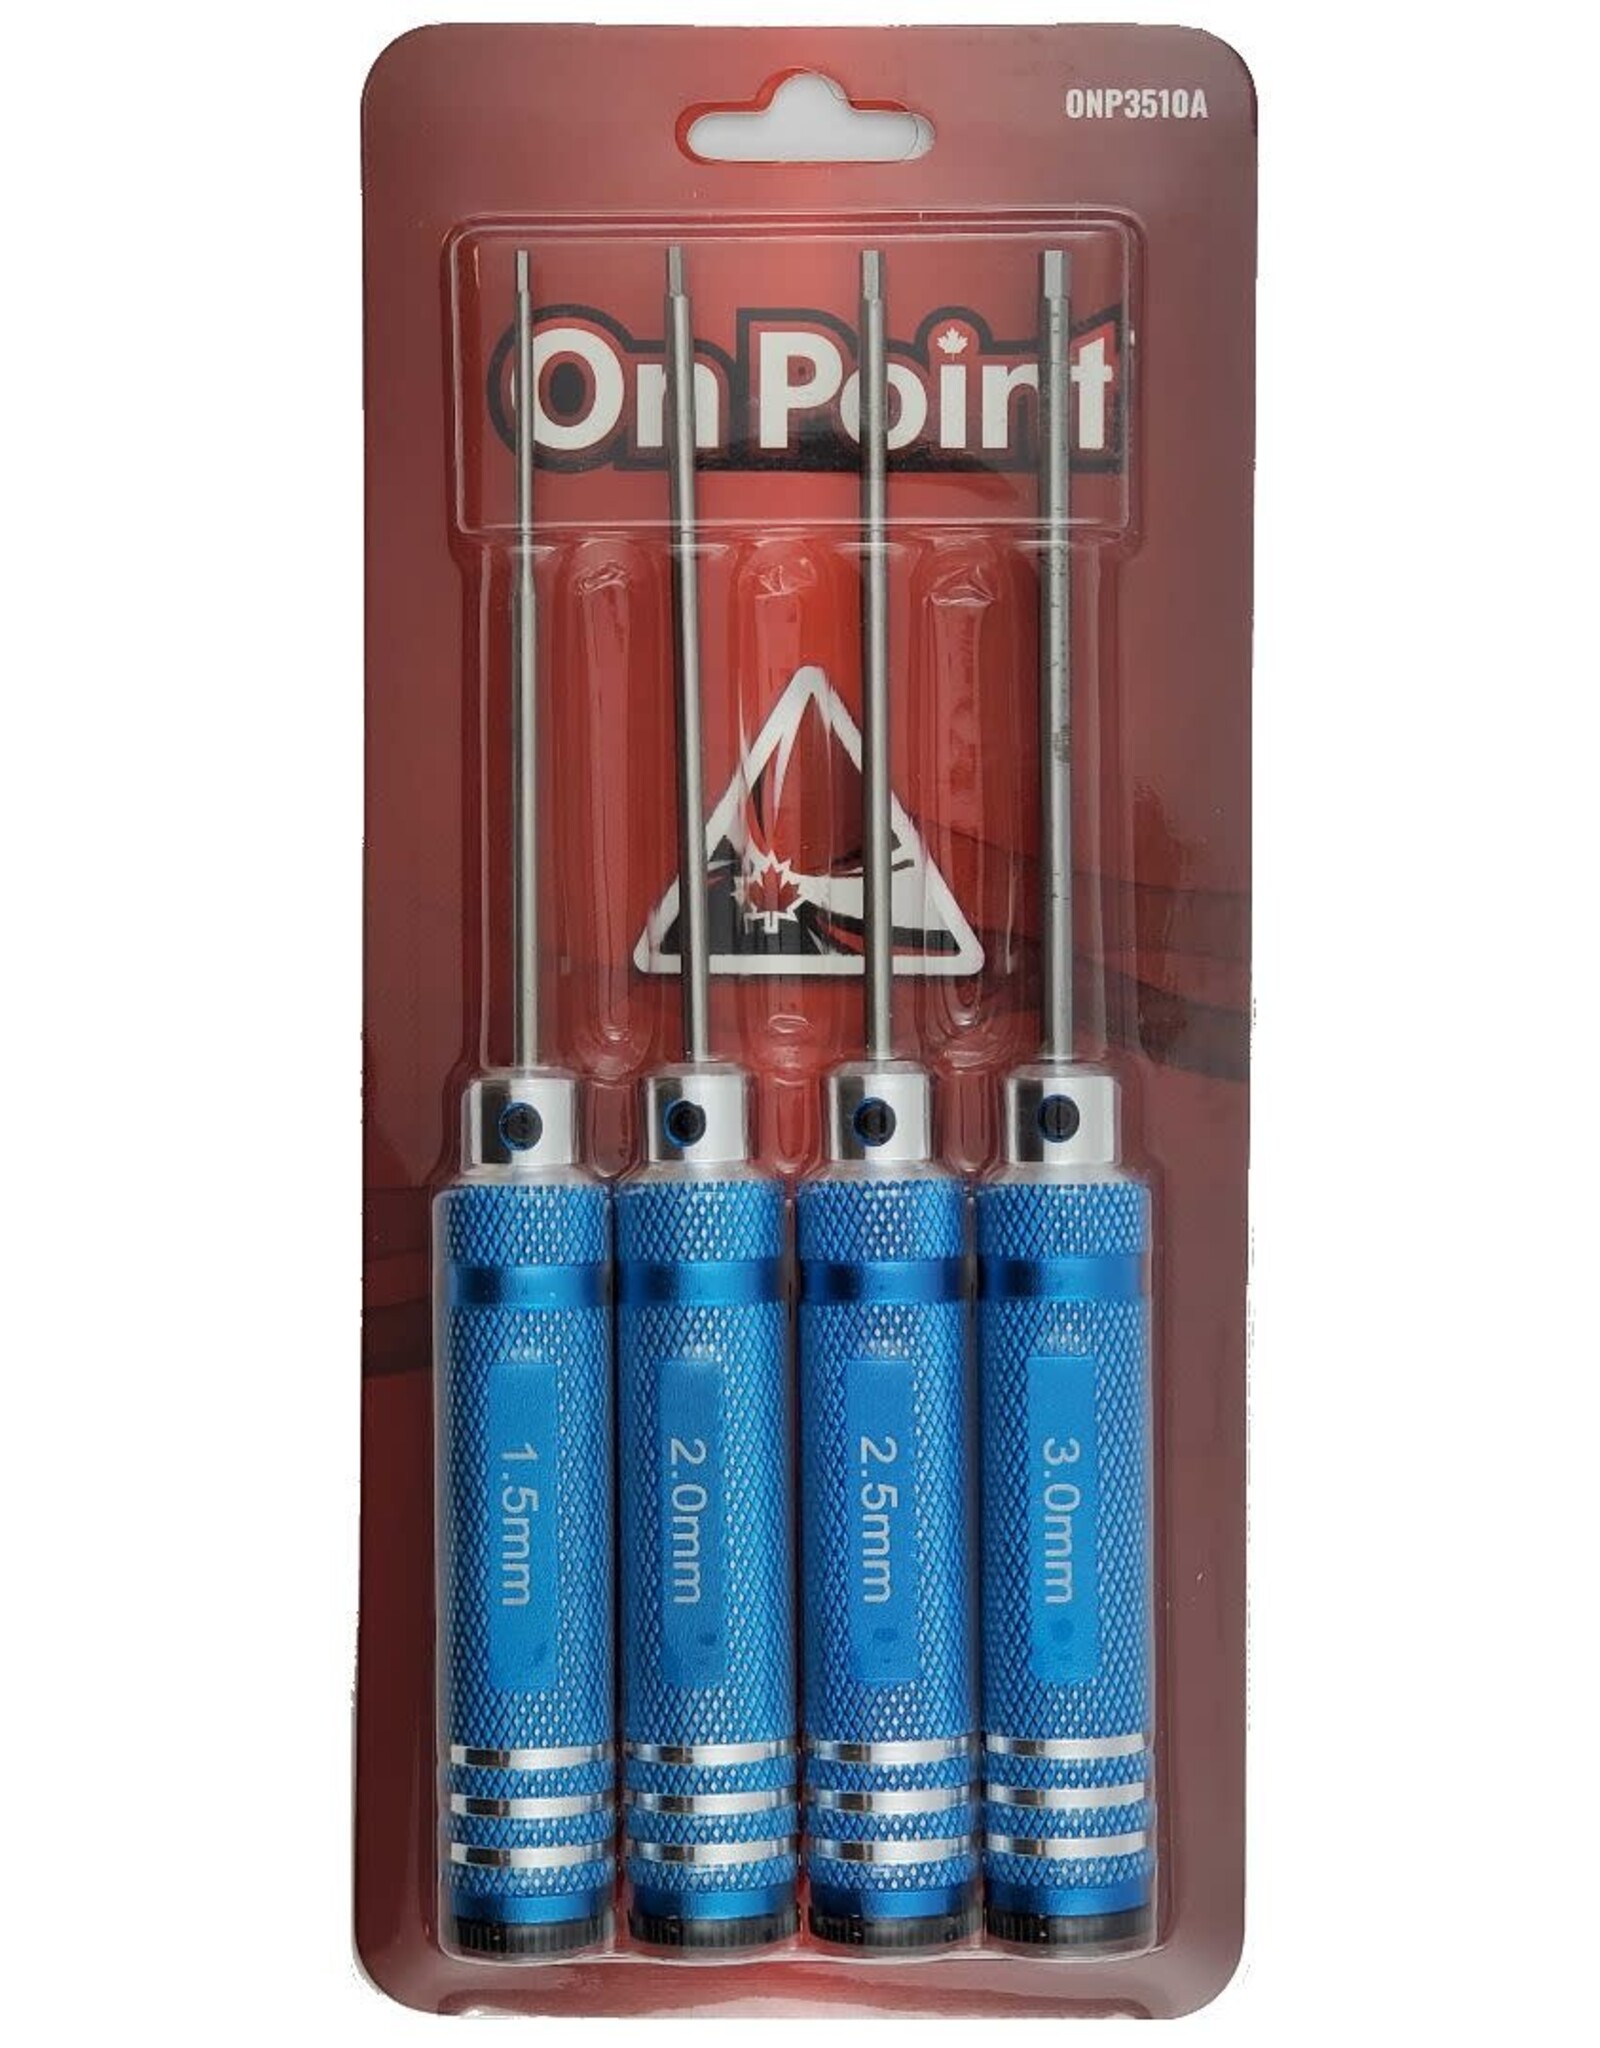 On Point Hex Screwdrivers (4) 1.5/2.0/2.5/3.0mm - blue